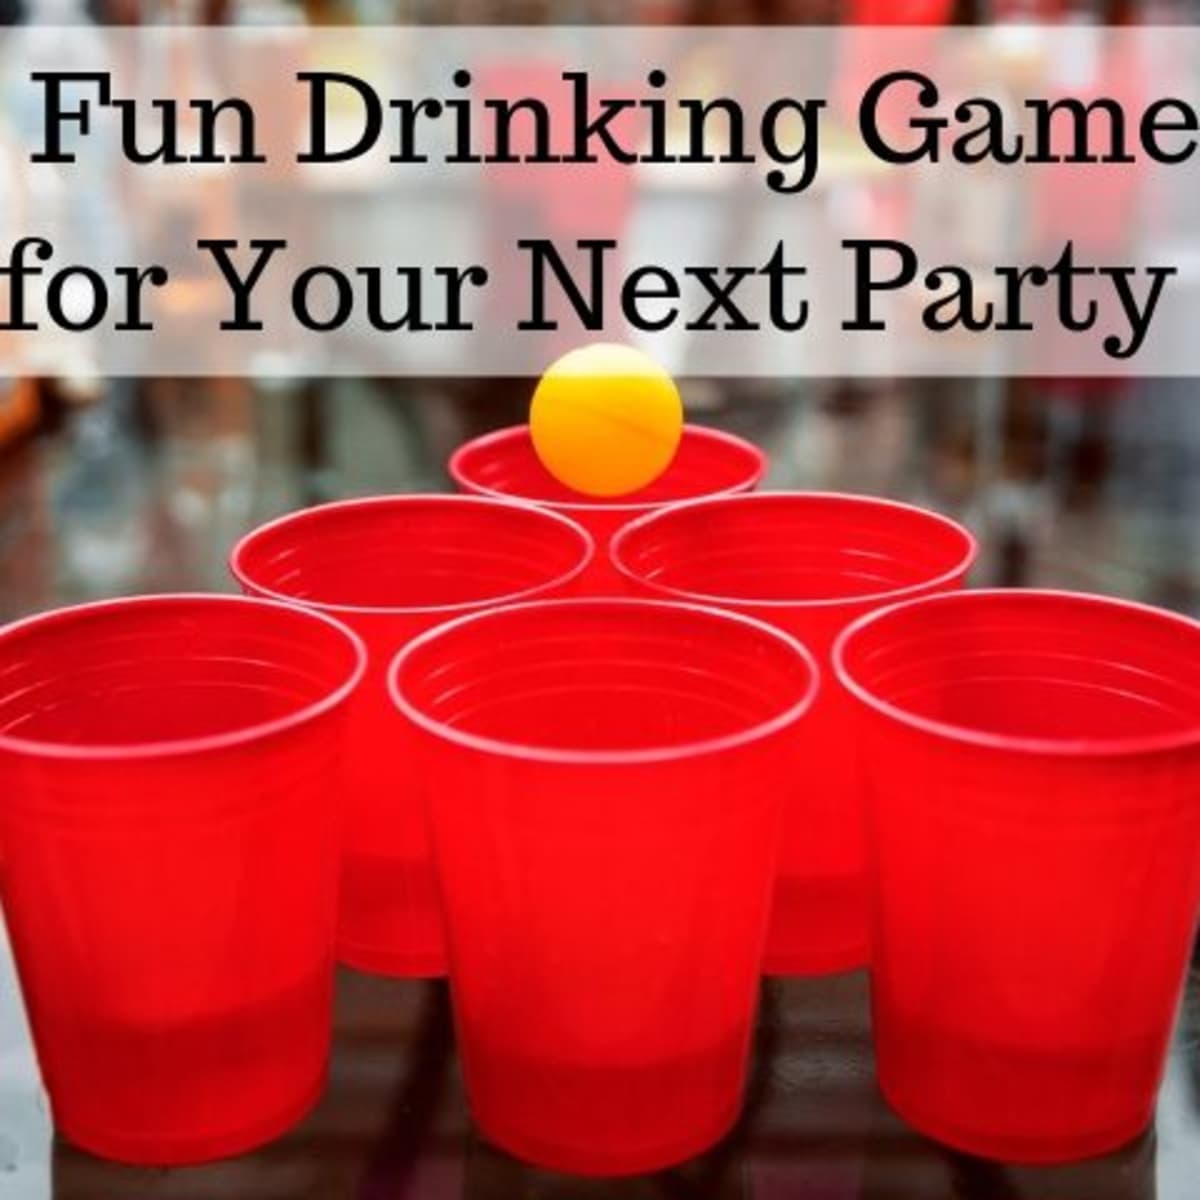 New 1000 Drinking Games party fun a variety college entertainment wild alcohol 